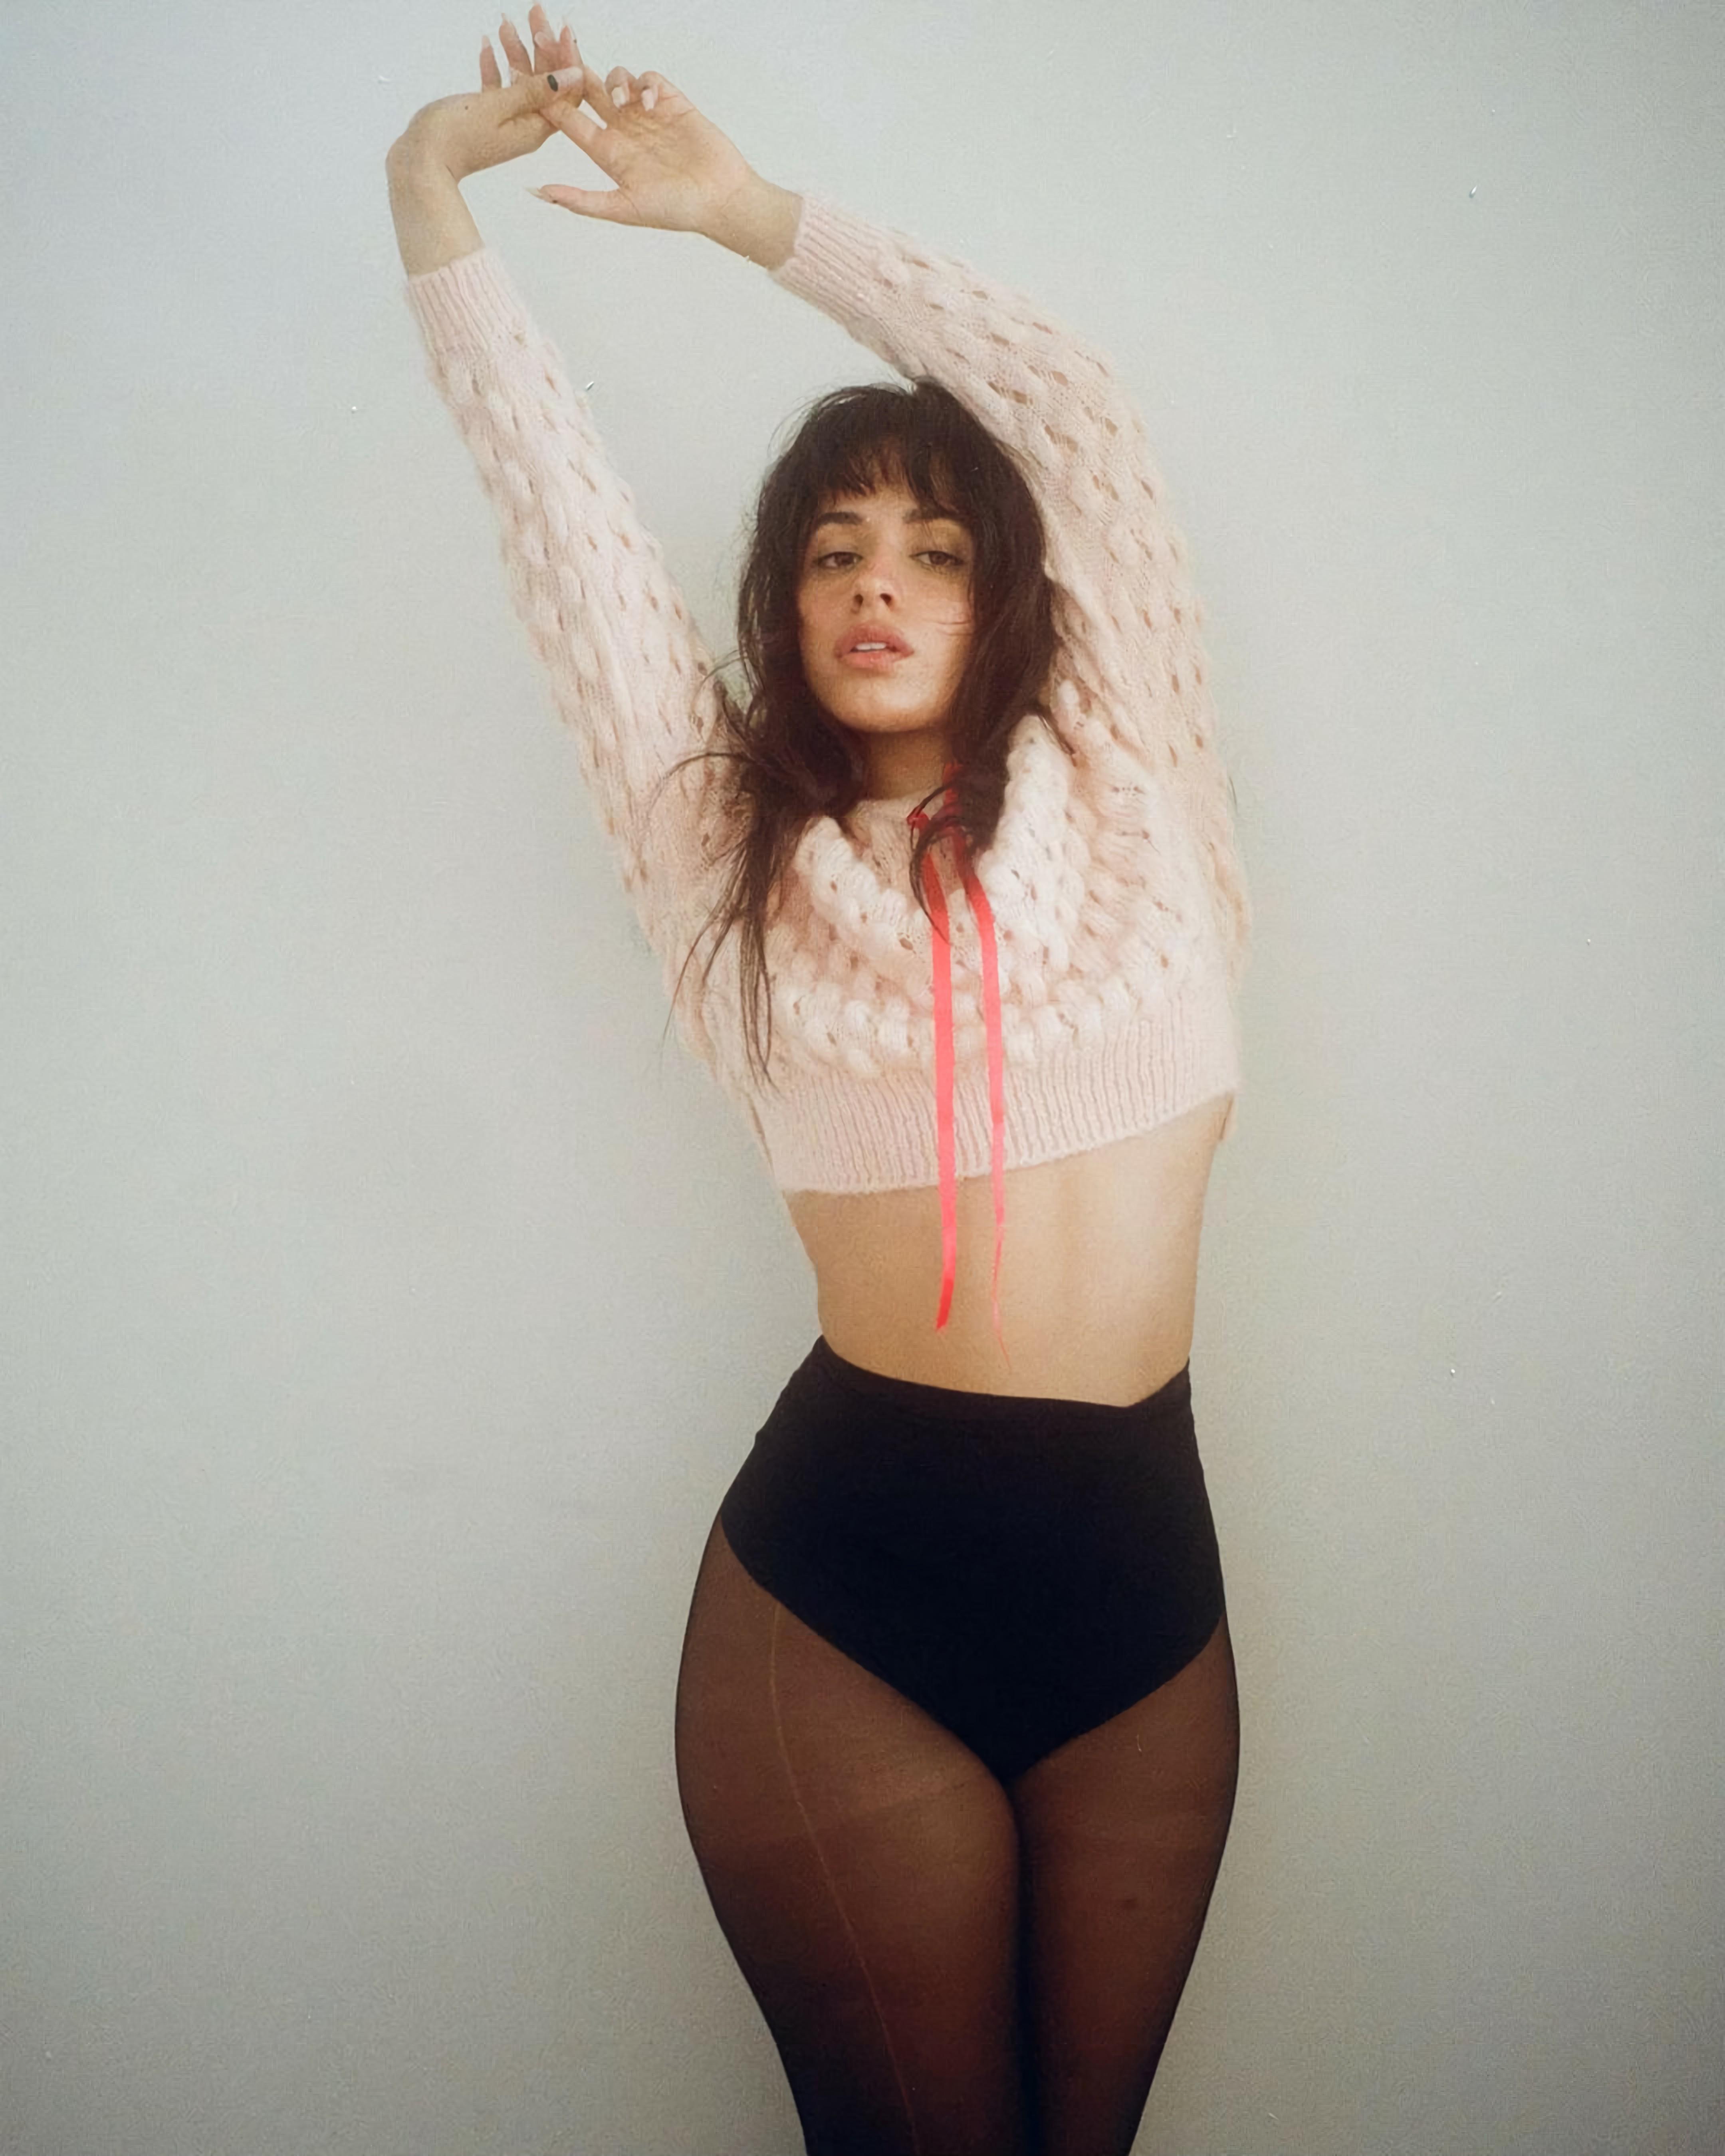 Camila Cabello Shows Off in a Crop Top and Stockings! - Photo 1